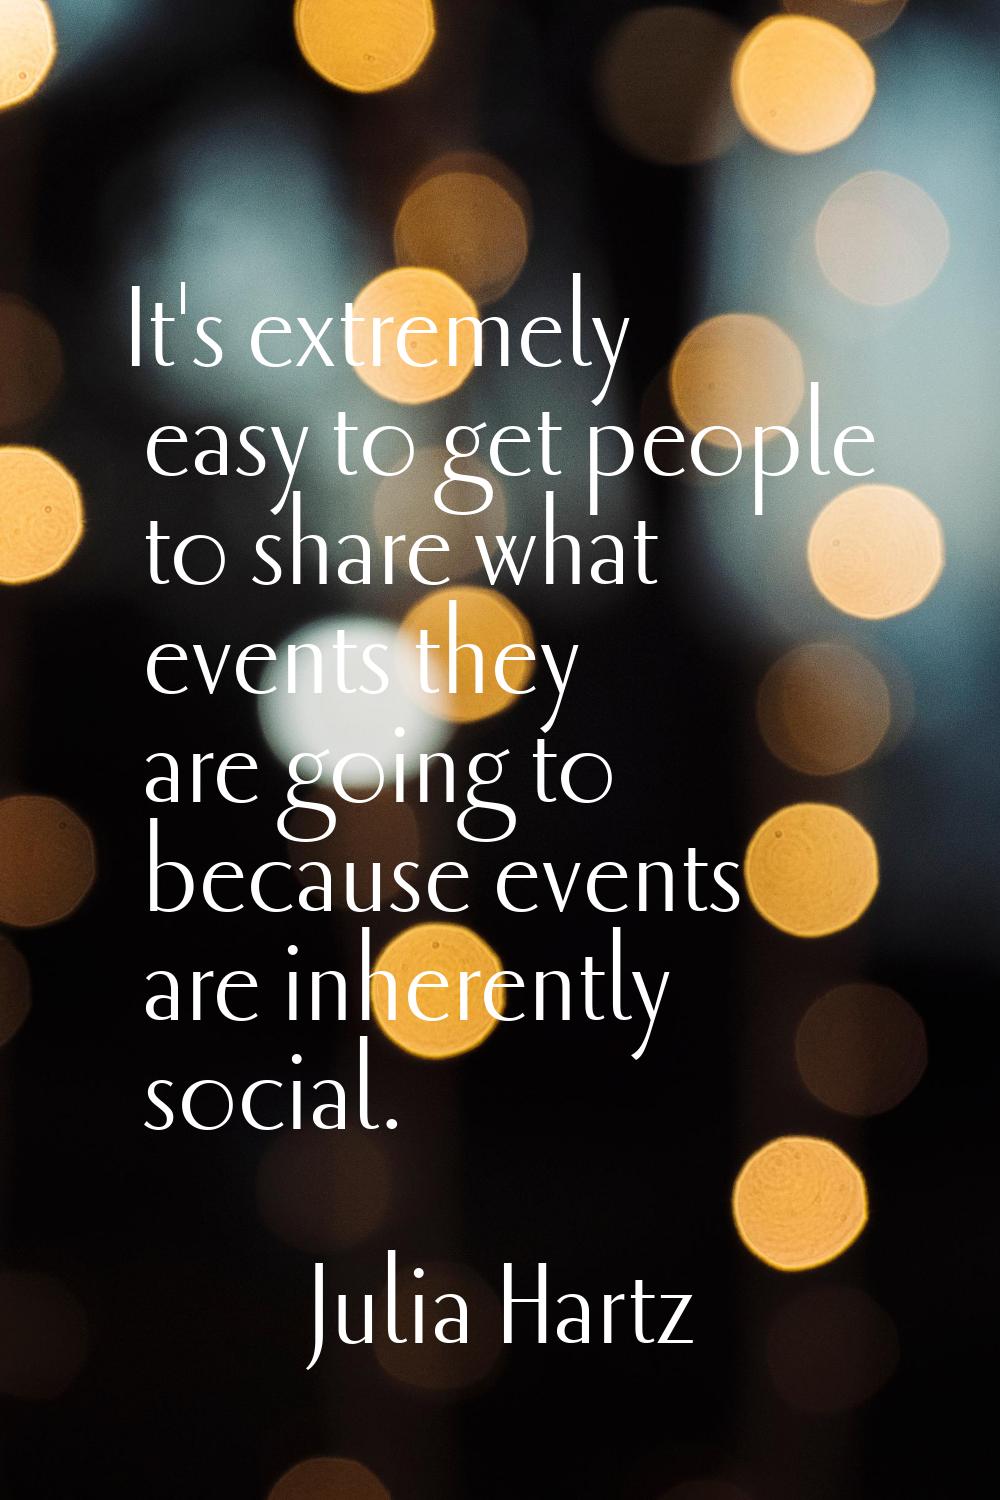 It's extremely easy to get people to share what events they are going to because events are inheren